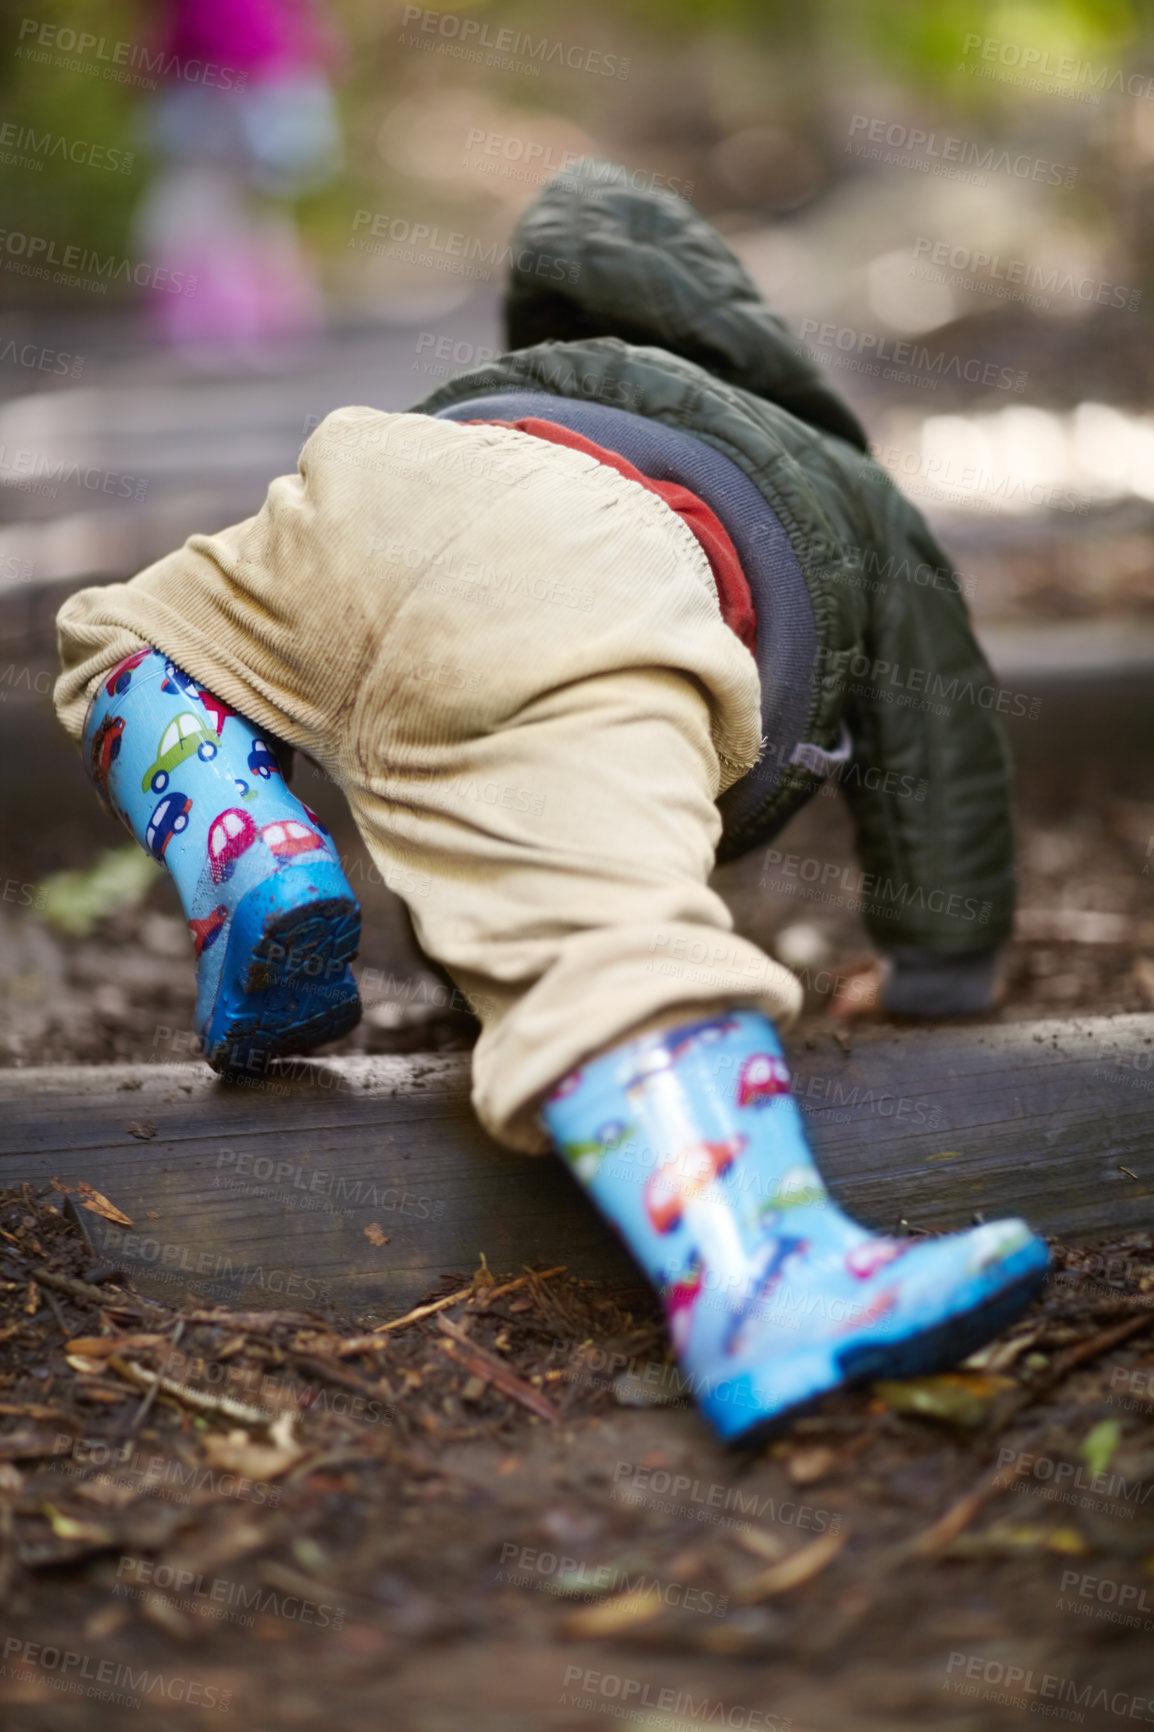 Buy stock photo Rearview of a young boy crawling in the dirt wearing gumboots